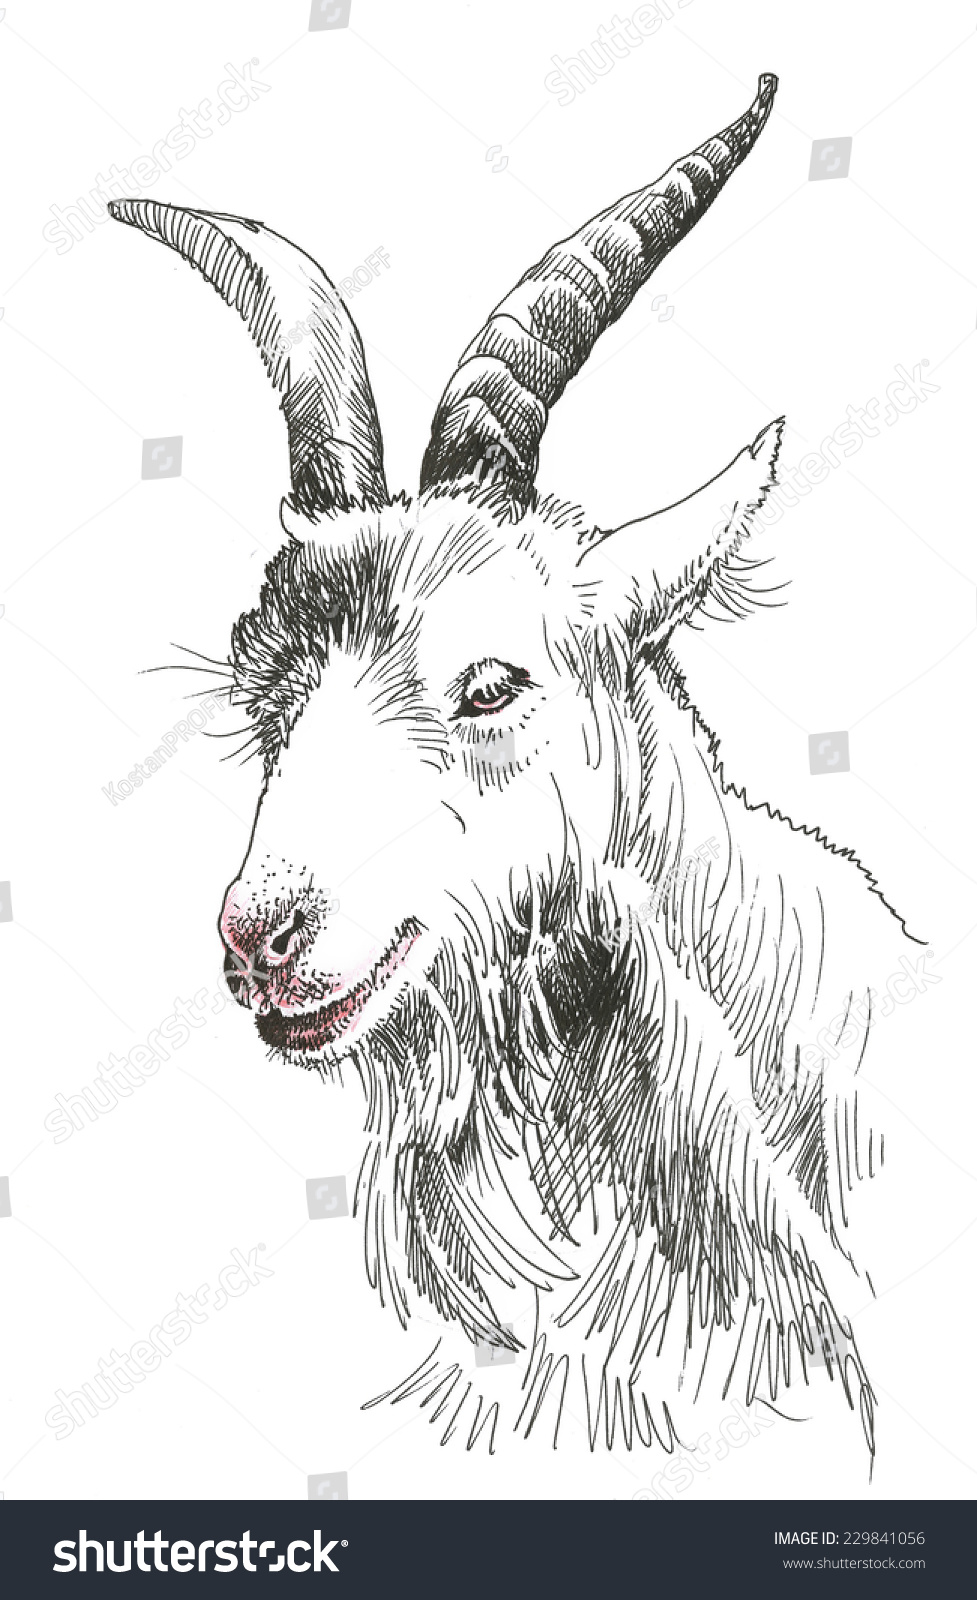 Goat Head Hand Drawn Isolated On White Background Stock Photo 229841056